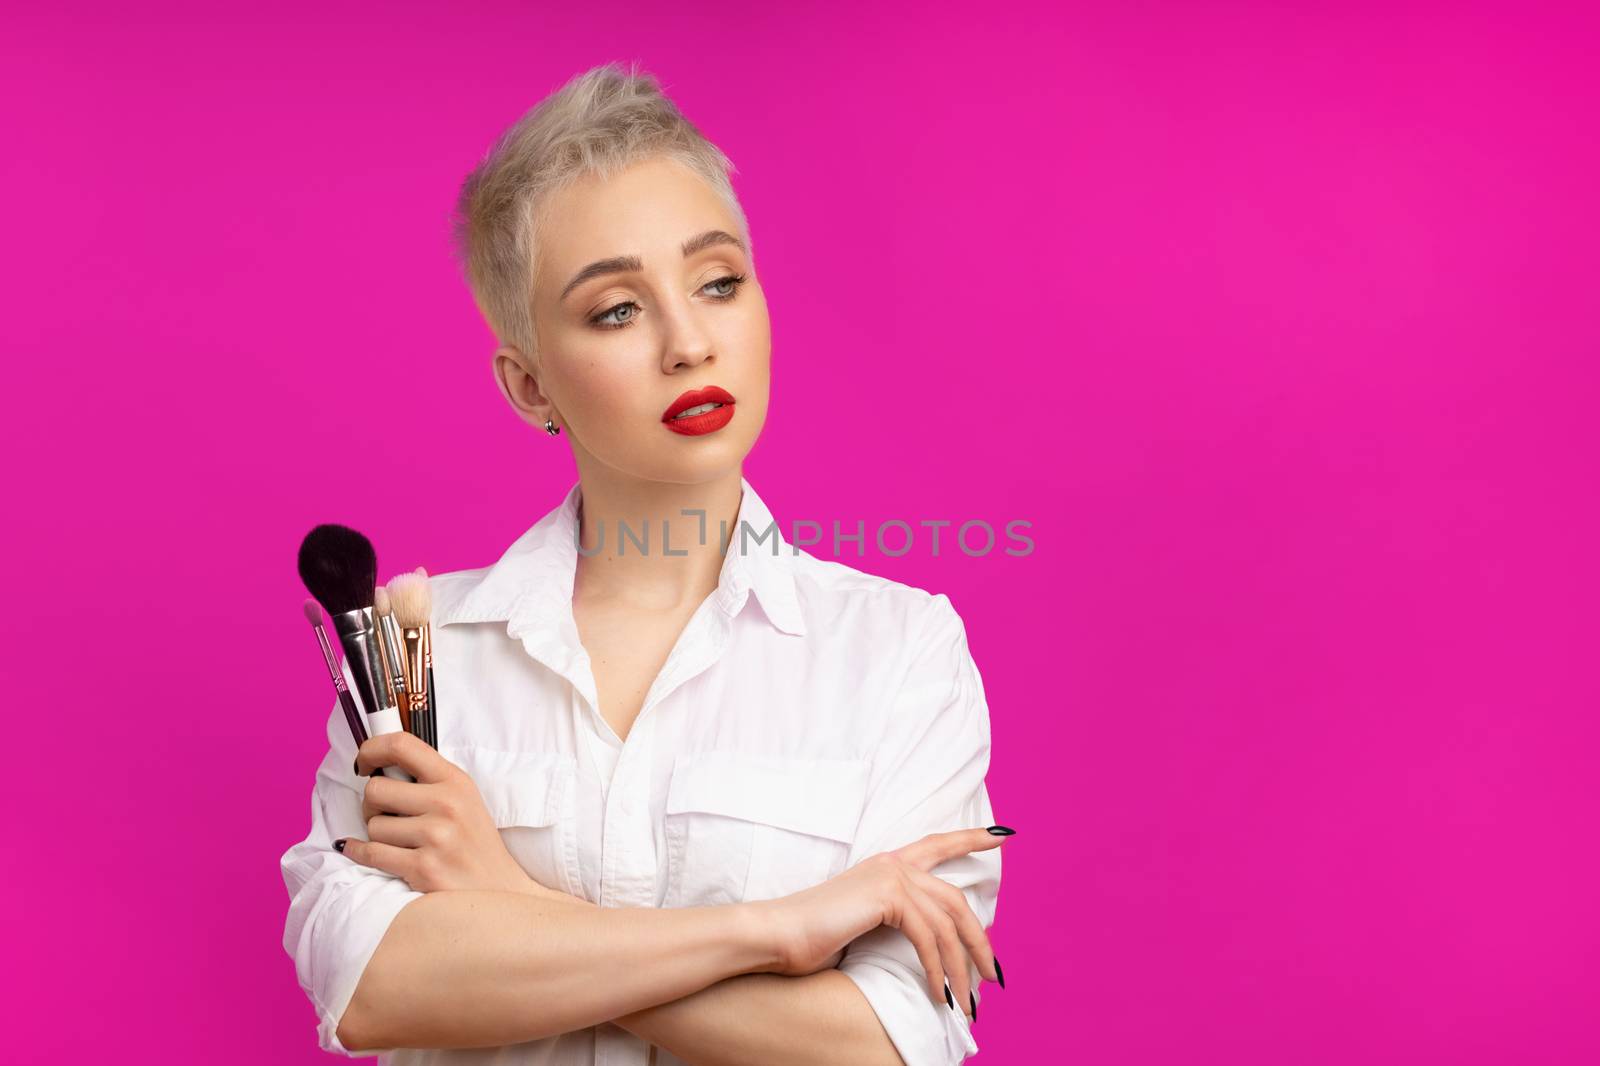 Close up portrait makeup artist. Make up courses. Concept of self visage masterclasess. Fashion professional. Woman hold makeup brushes on the hands. Studio shot on the pinkcolor background